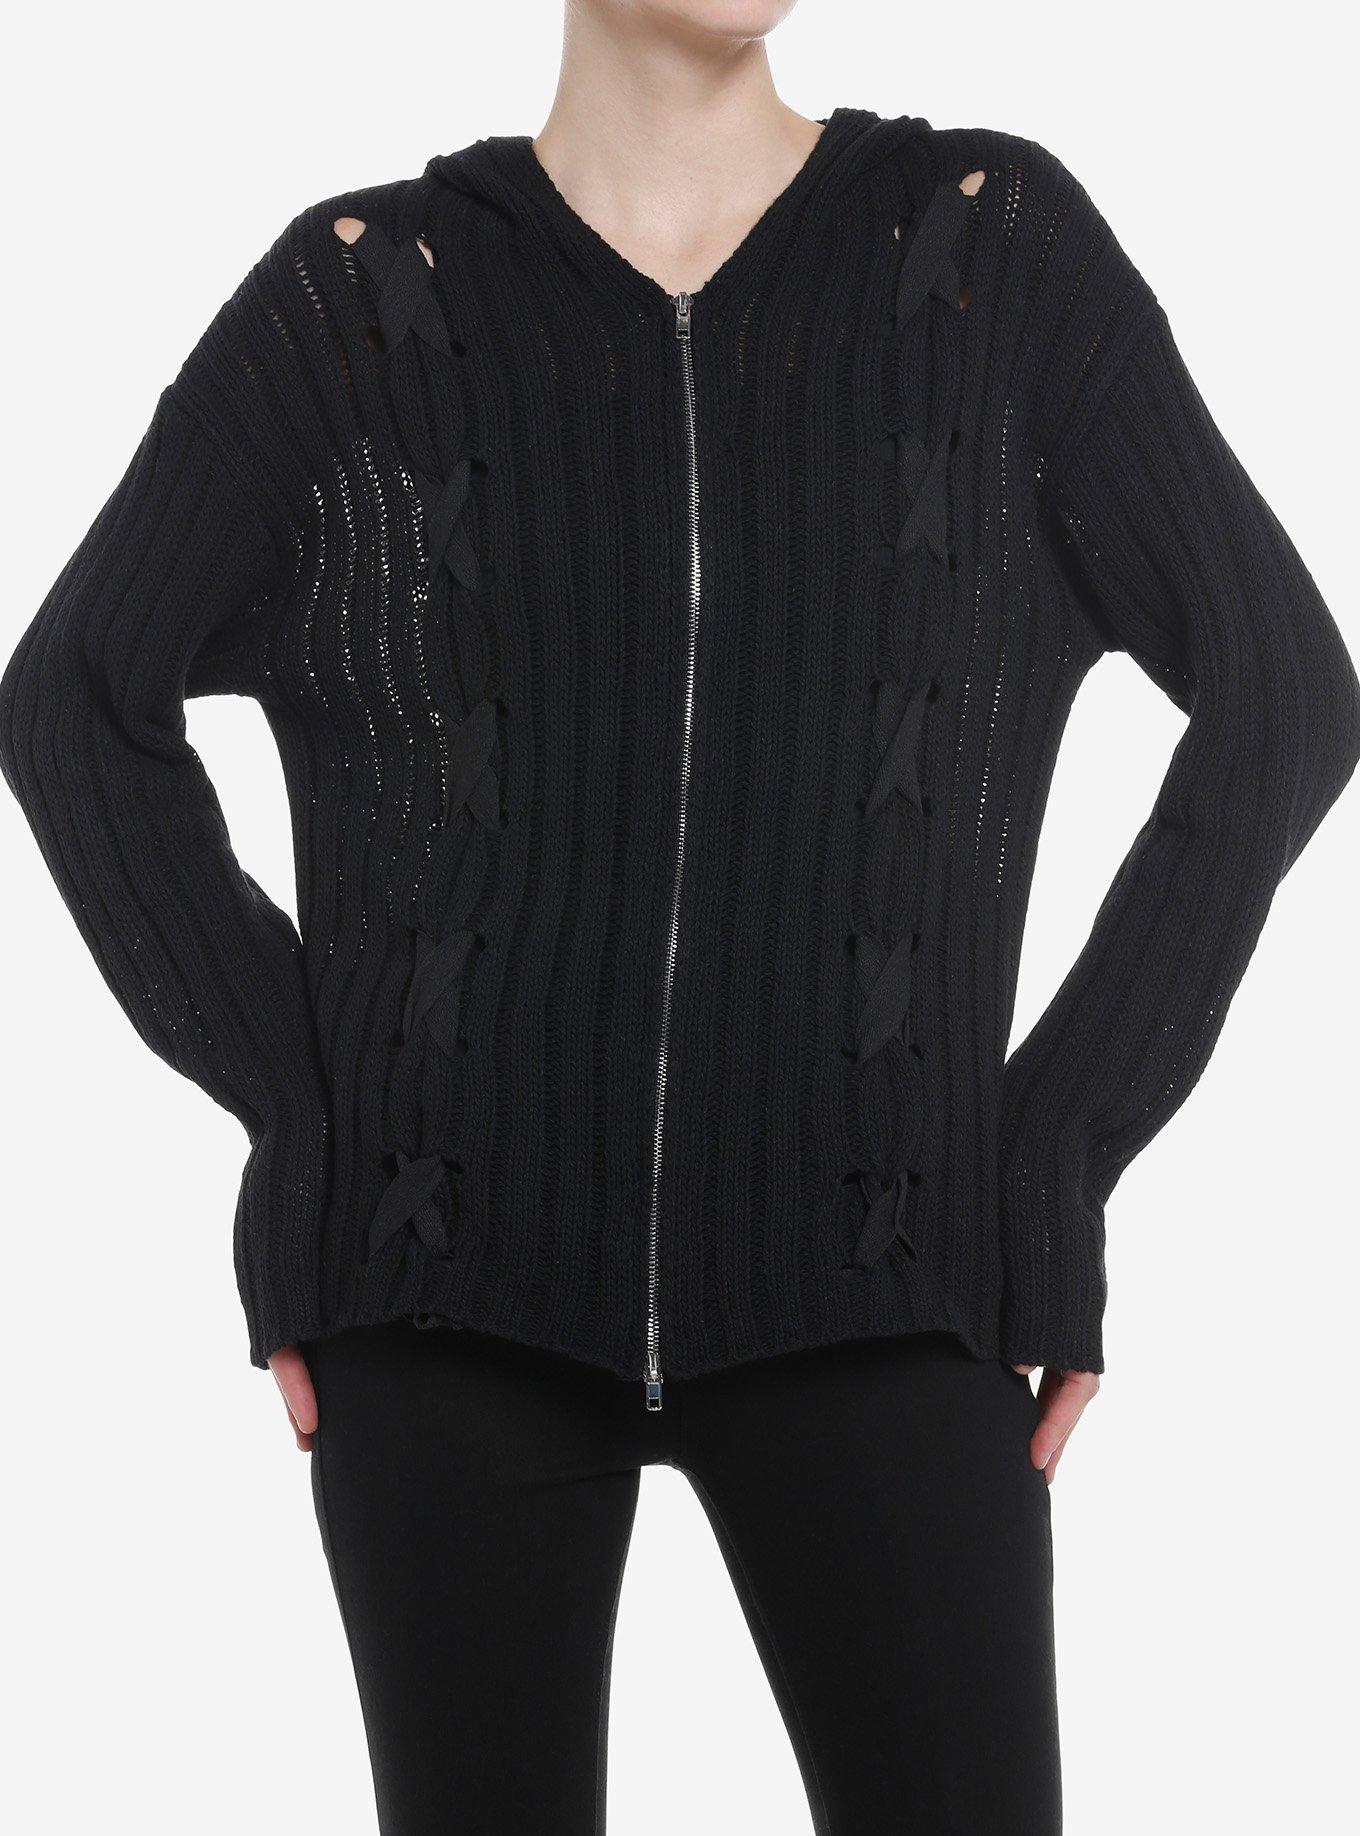 Black Lace-Up Girls Knit Hoodie